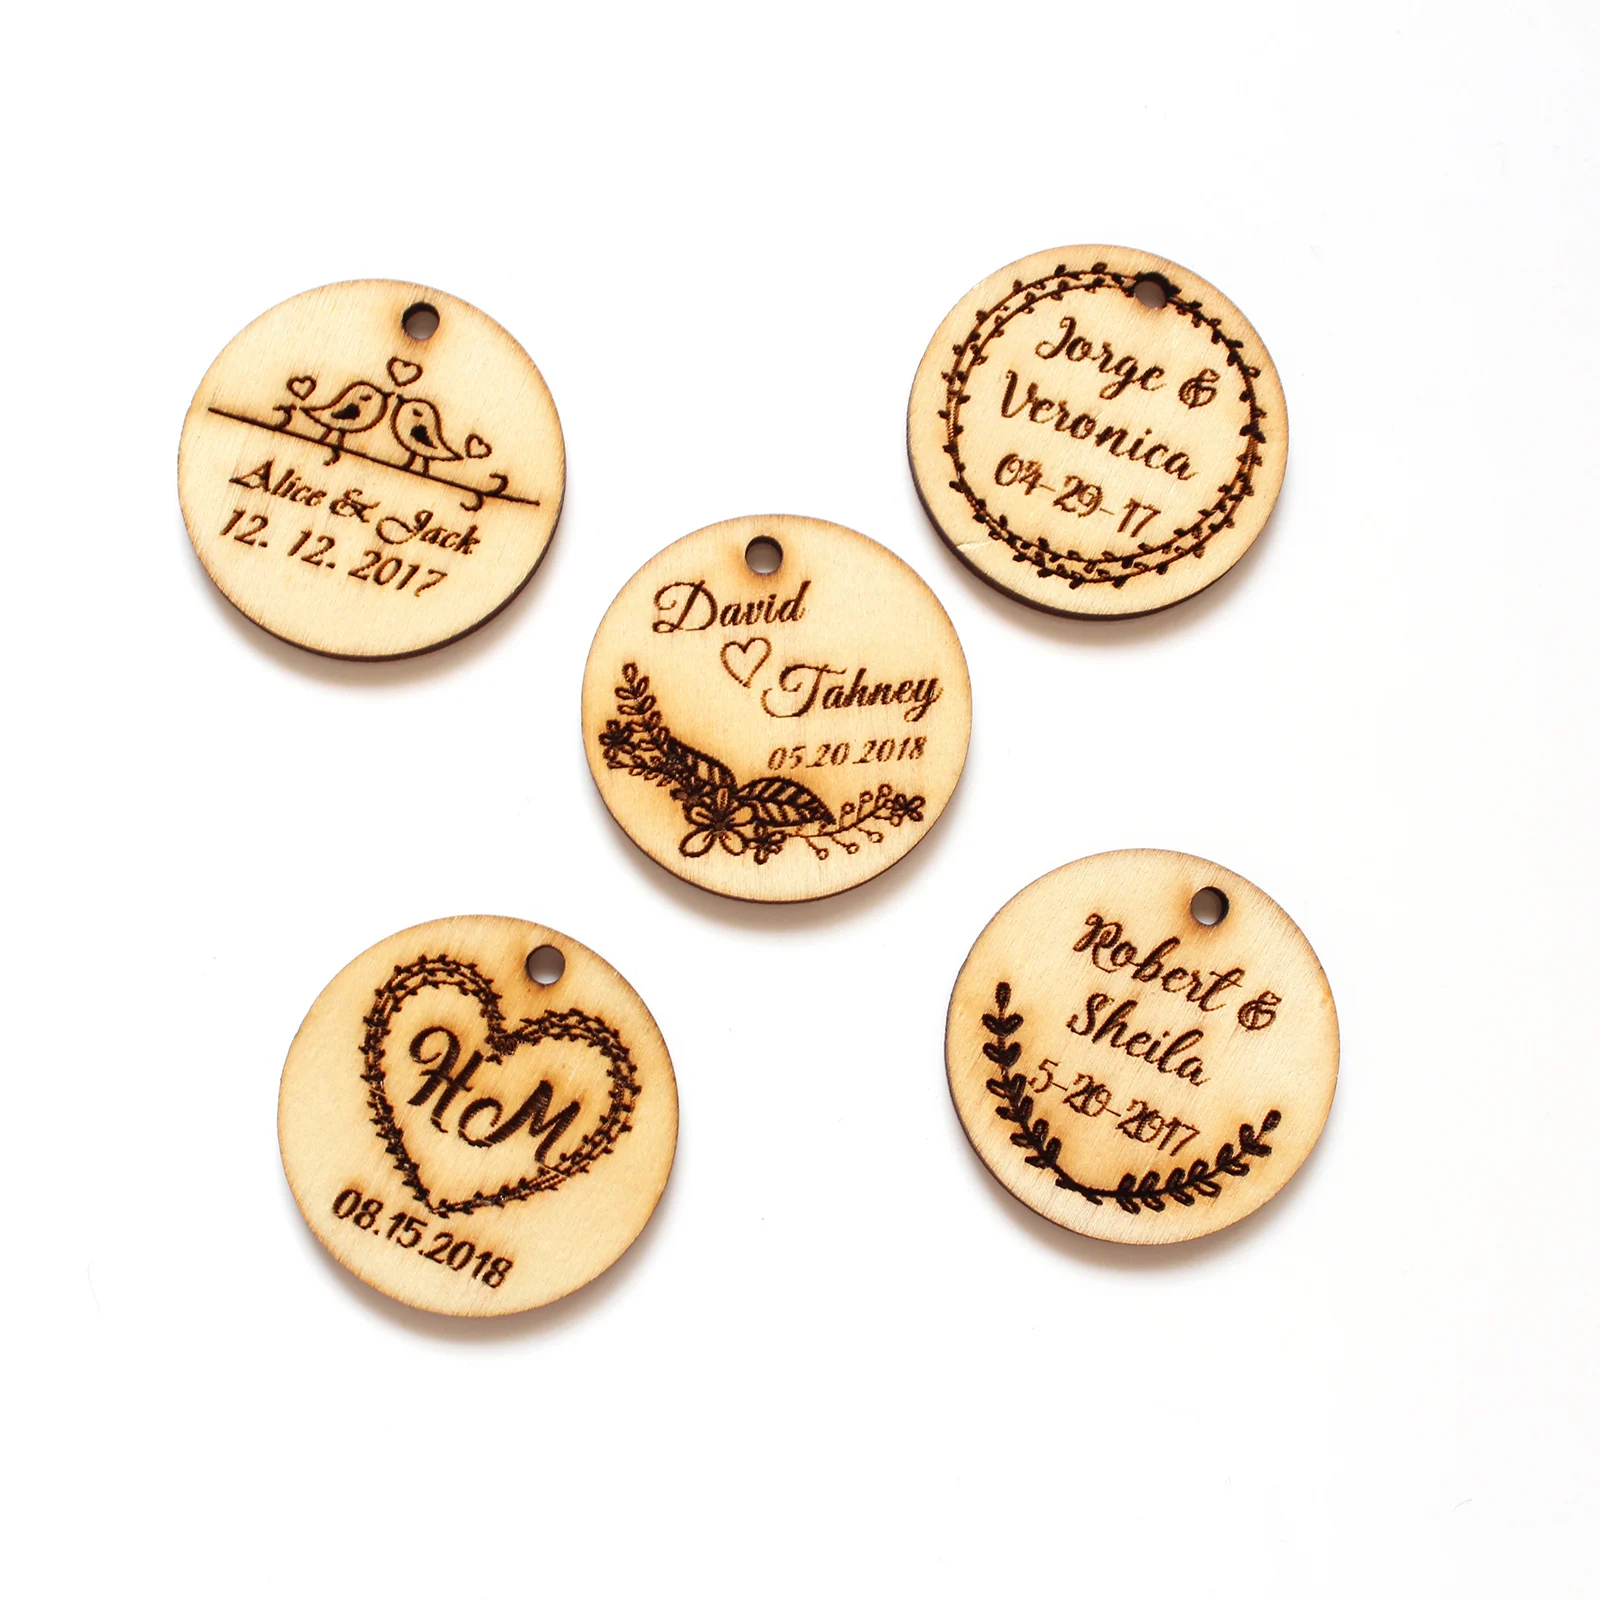 

50 Pieces Personalized Engraved Rustic Baptism Wooden Tags Birthday Gift Anniversary Wedding Round Tags Baby Shower Decor Favors